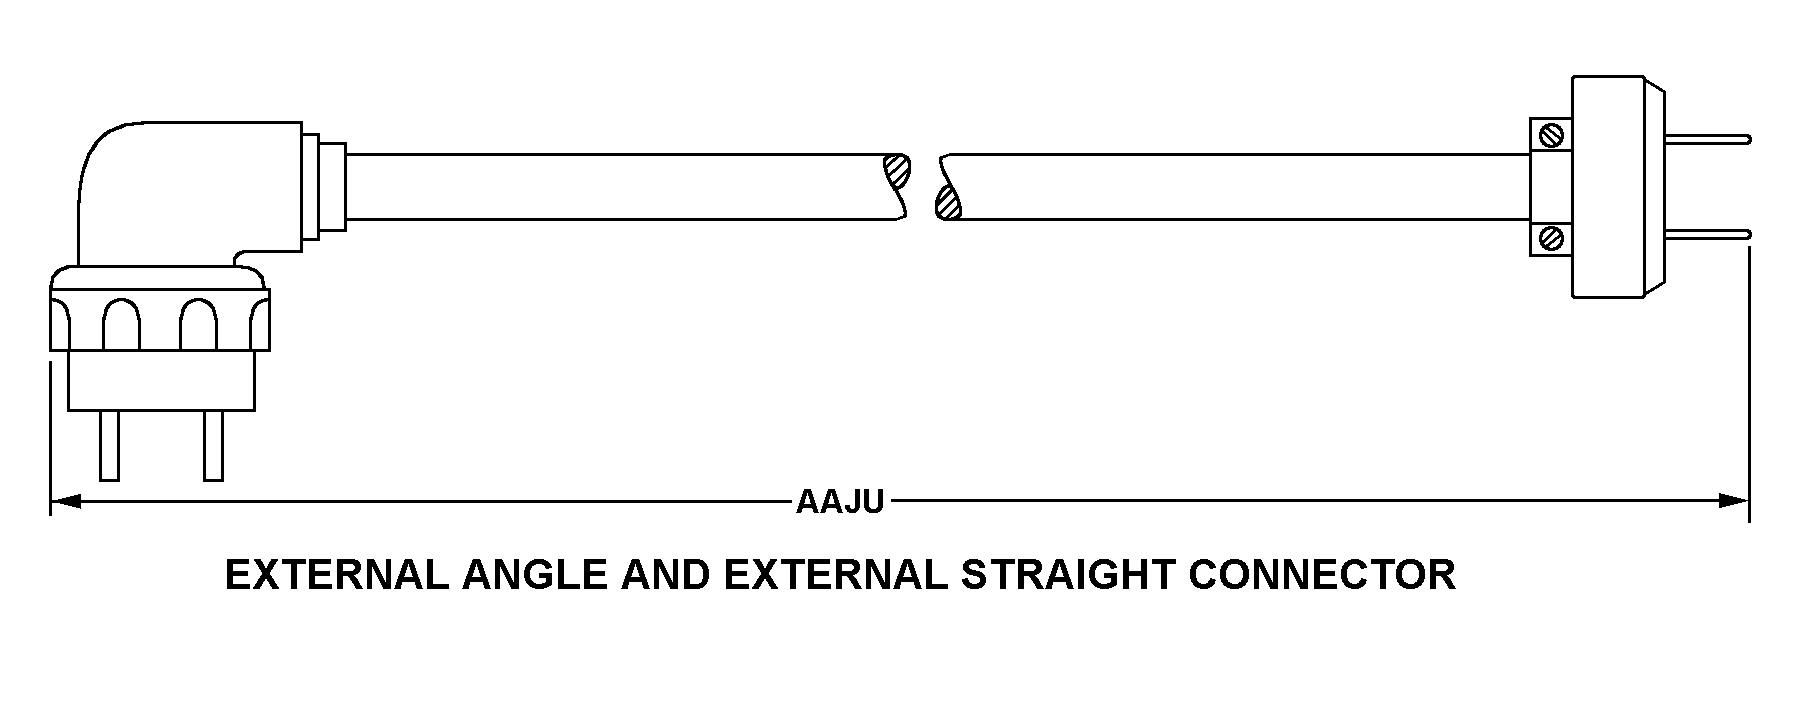 EXTERNAL ANGLE AND EXTERNAL STRAIGHT CONNECTOR style nsn 5995-01-374-8450